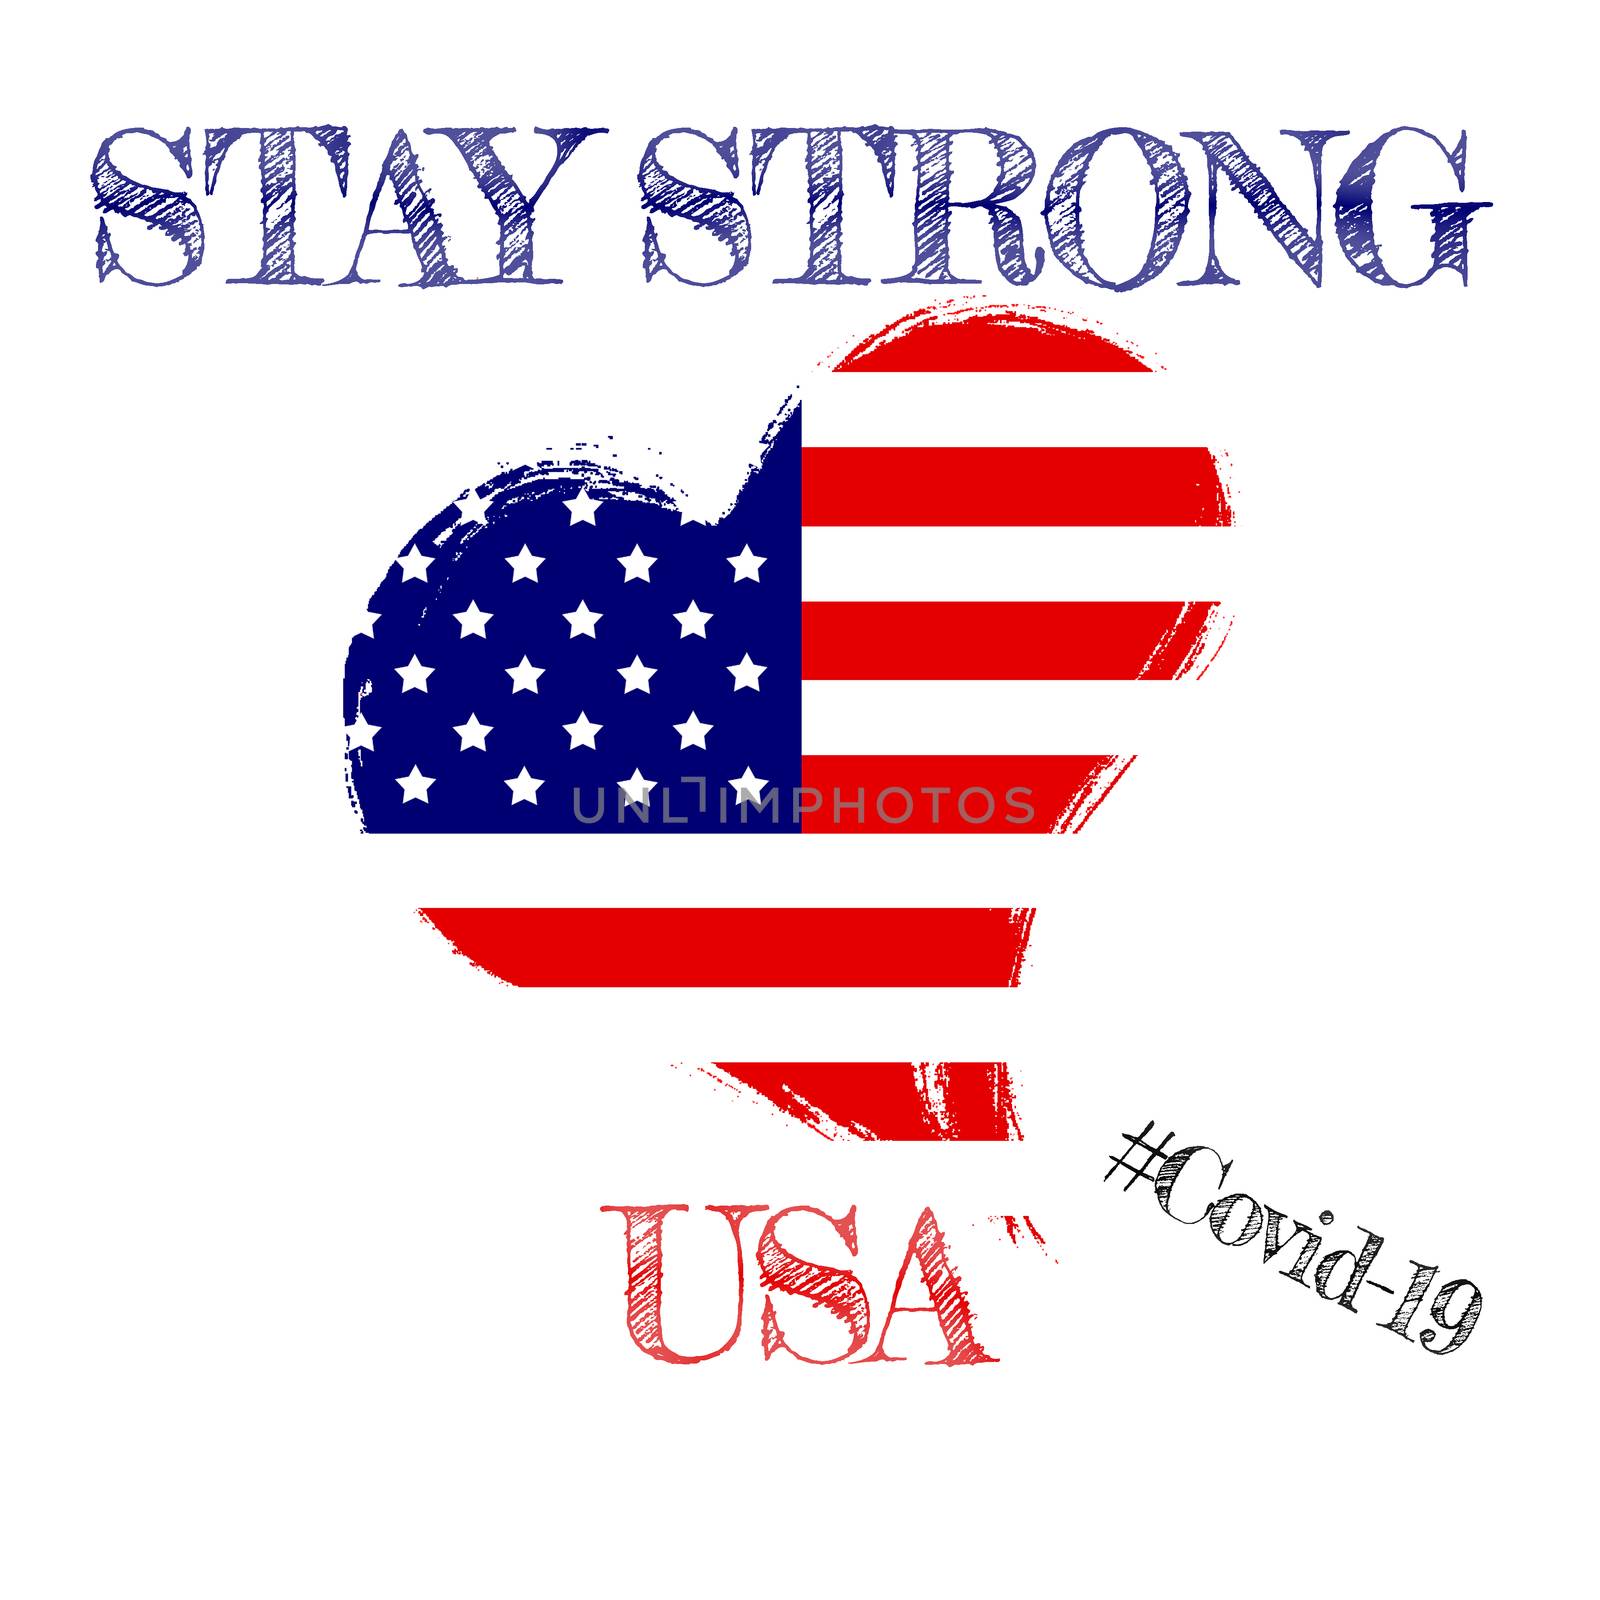 Patriotic inspirational positive quote about novel coronavirus covid-19 pandemic. Stay strong Usa.